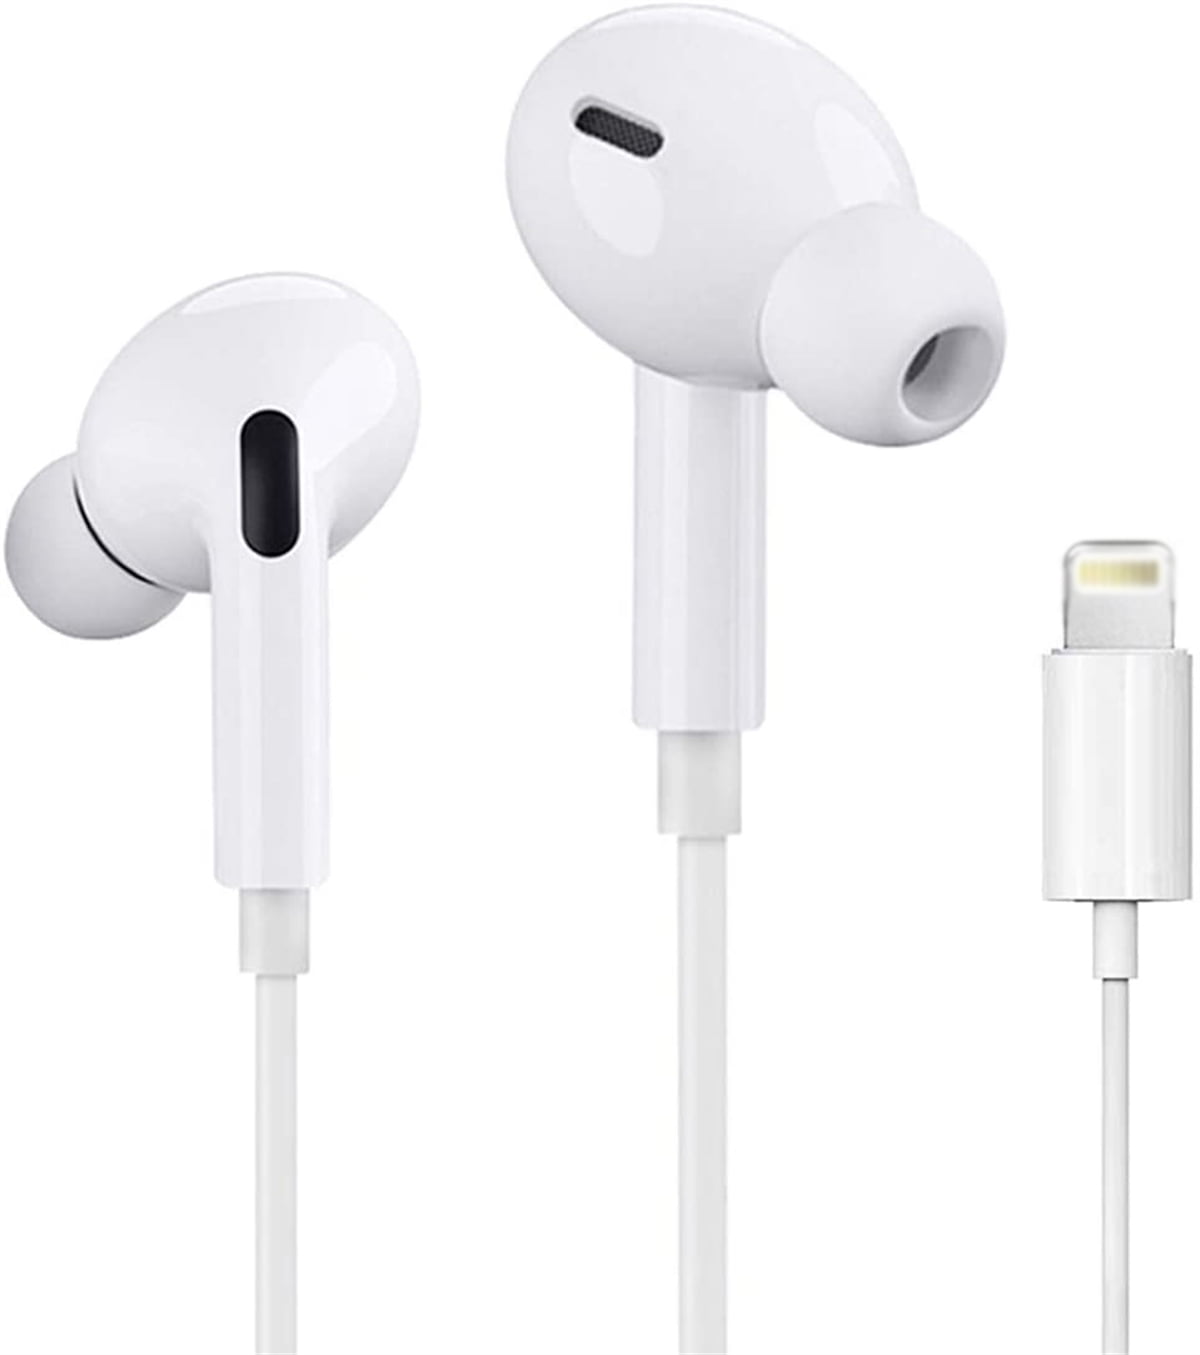 2 Pack Apple Earbuds Wired 【Apple MFi Certified】 iPhone Headphones Wired with Lightning Connector Compatible with iPhone 13/12/11 Pro Max/Xs Max/XR/X/7/8 Plus Built in Microphone & Volume Control 